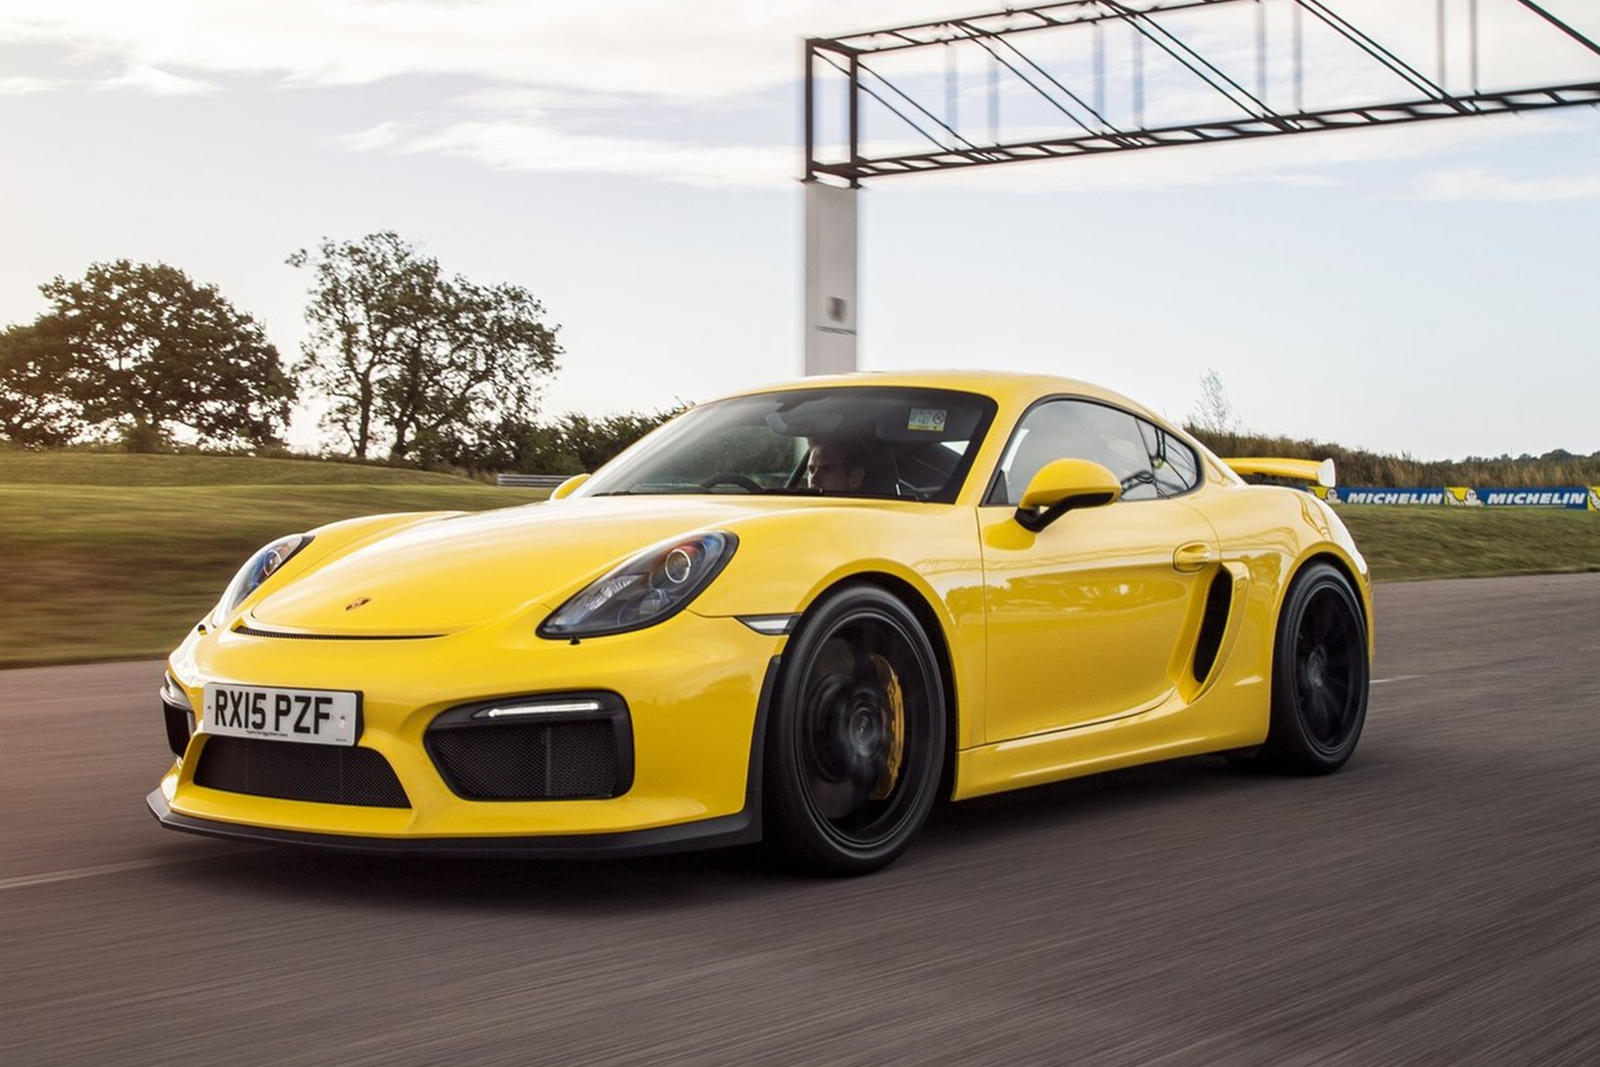 Porsche Boxster Spyder and Cayman GT4 are used jewelry